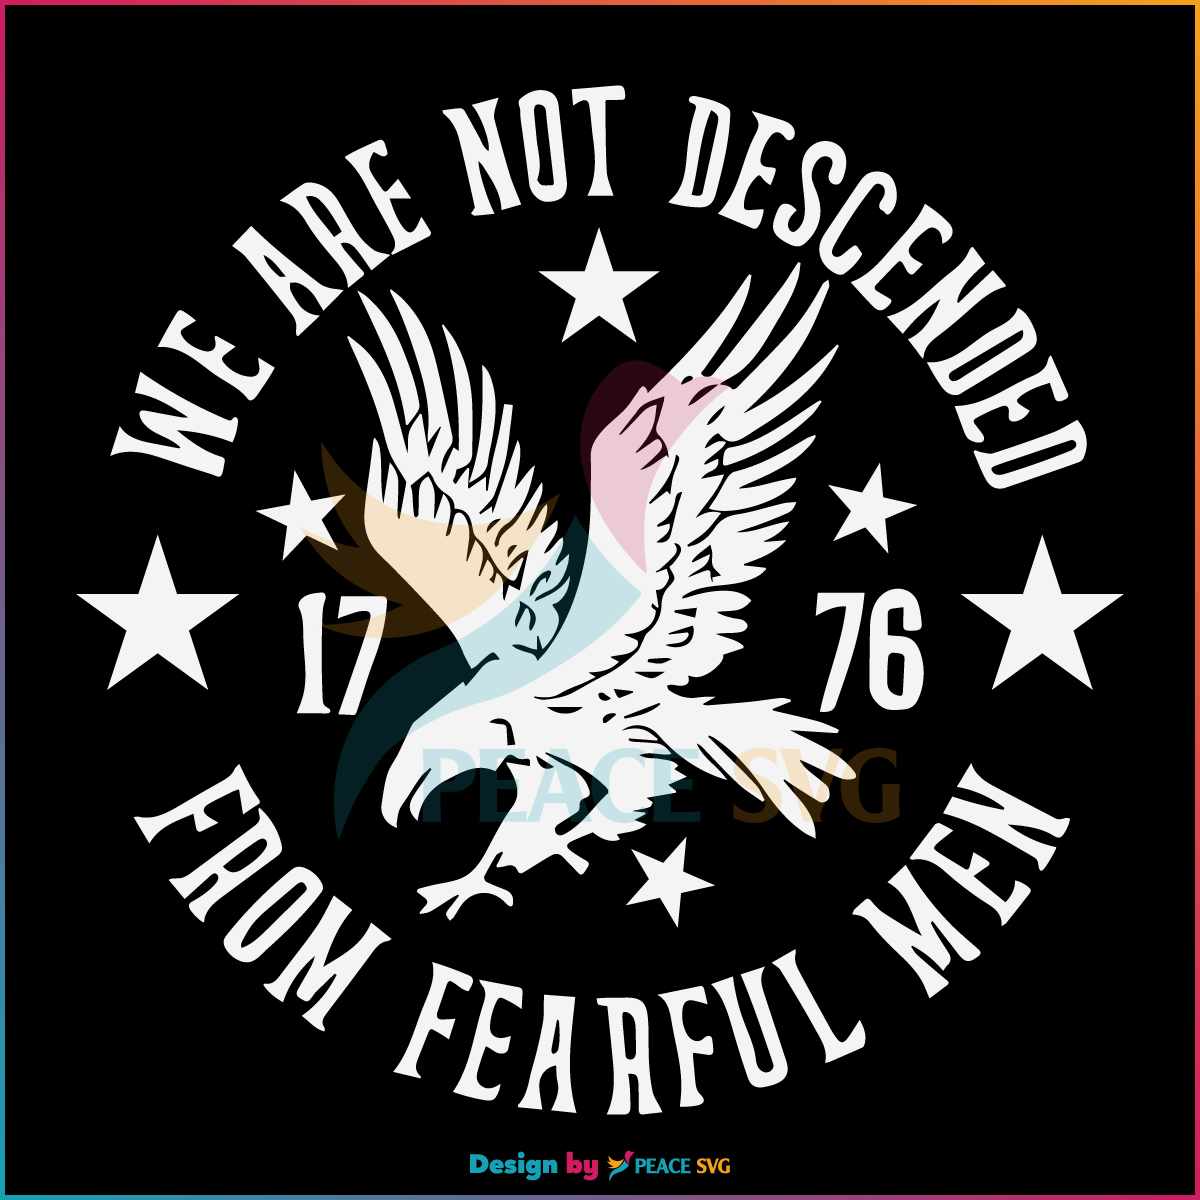 we-are-not-descended-from-fearful-men-svg-digital-cricut-file